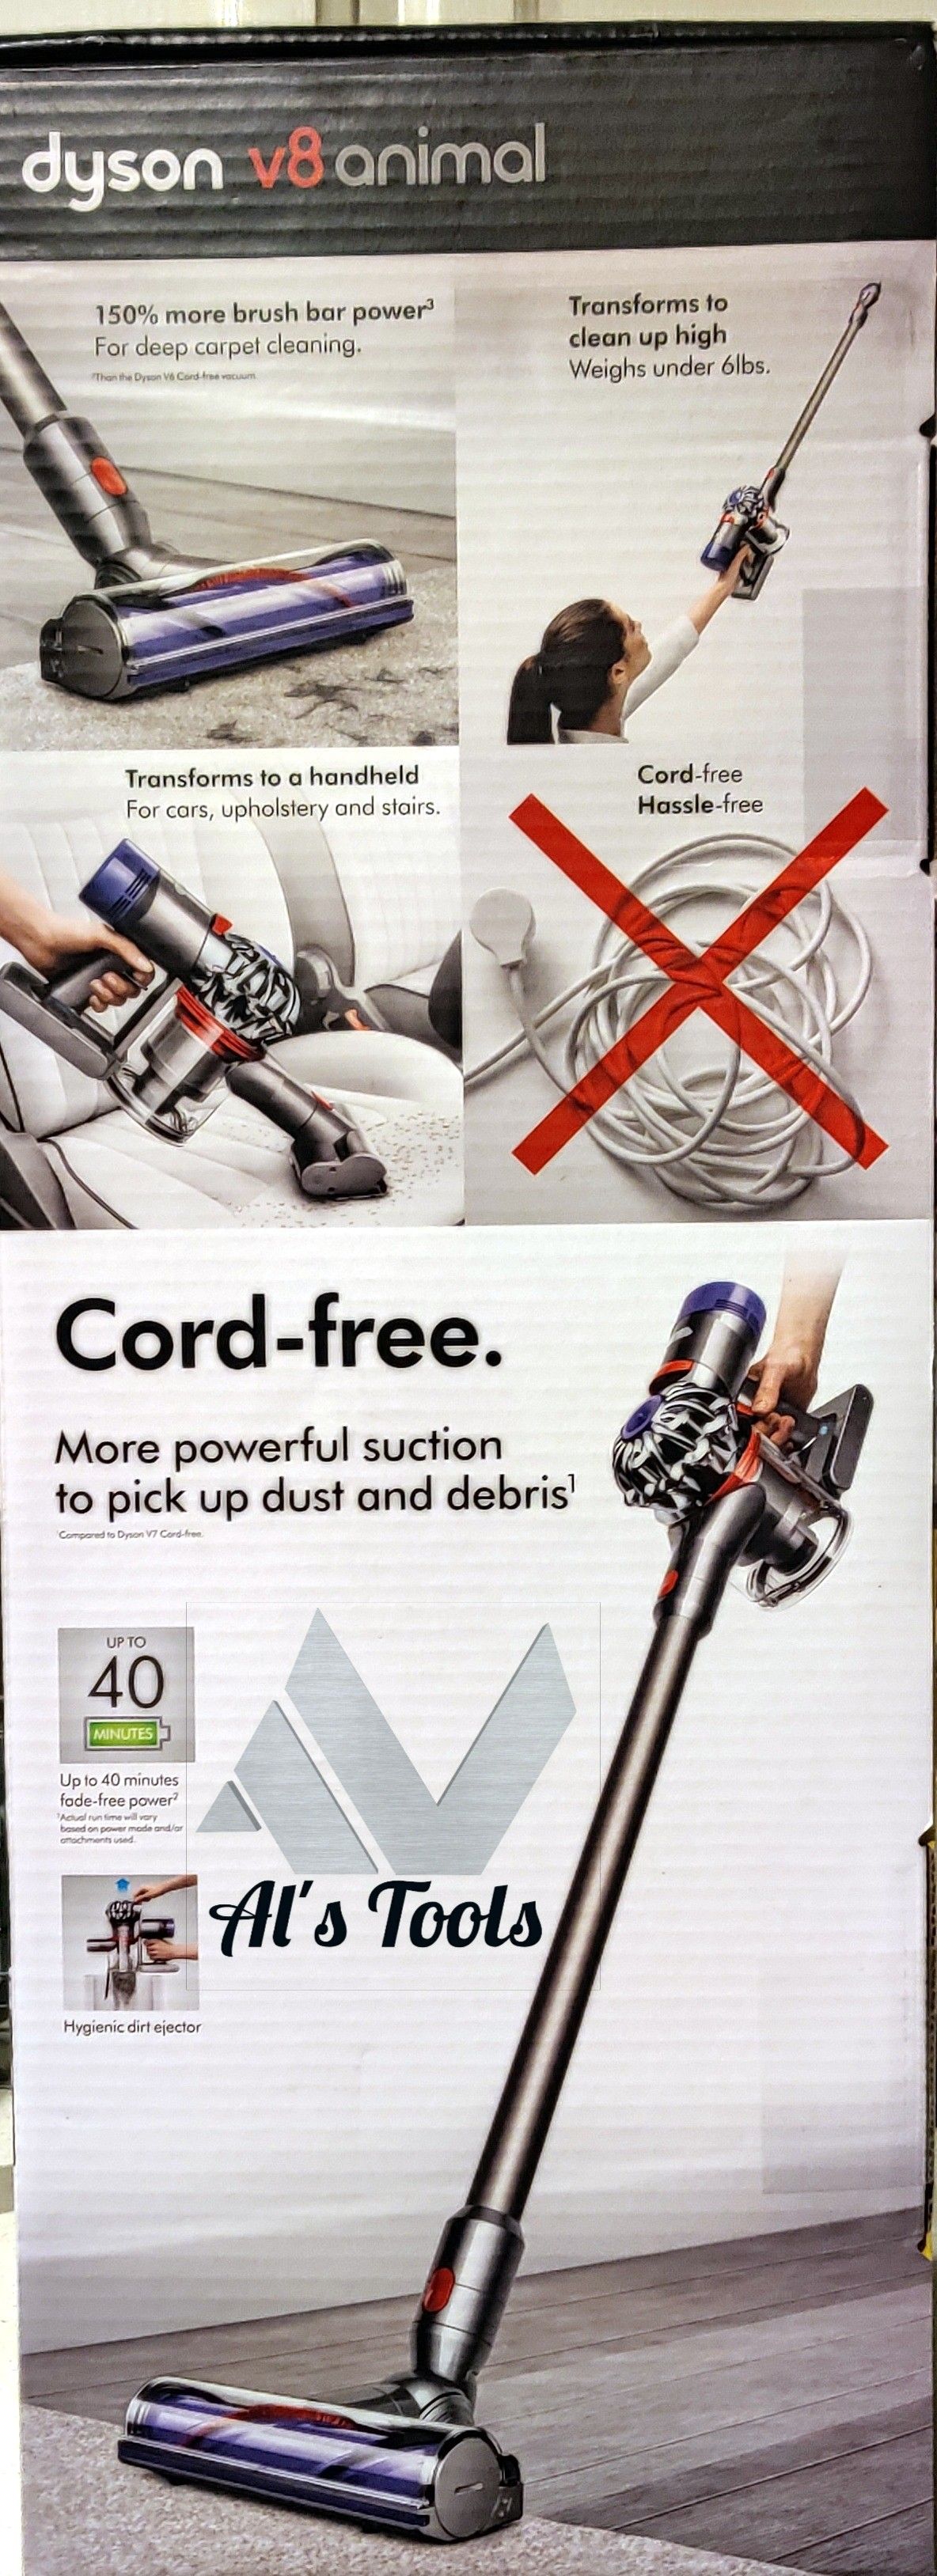 Dyson V8 animal cordless vacuum with 40 minute runtime and HEPA filters